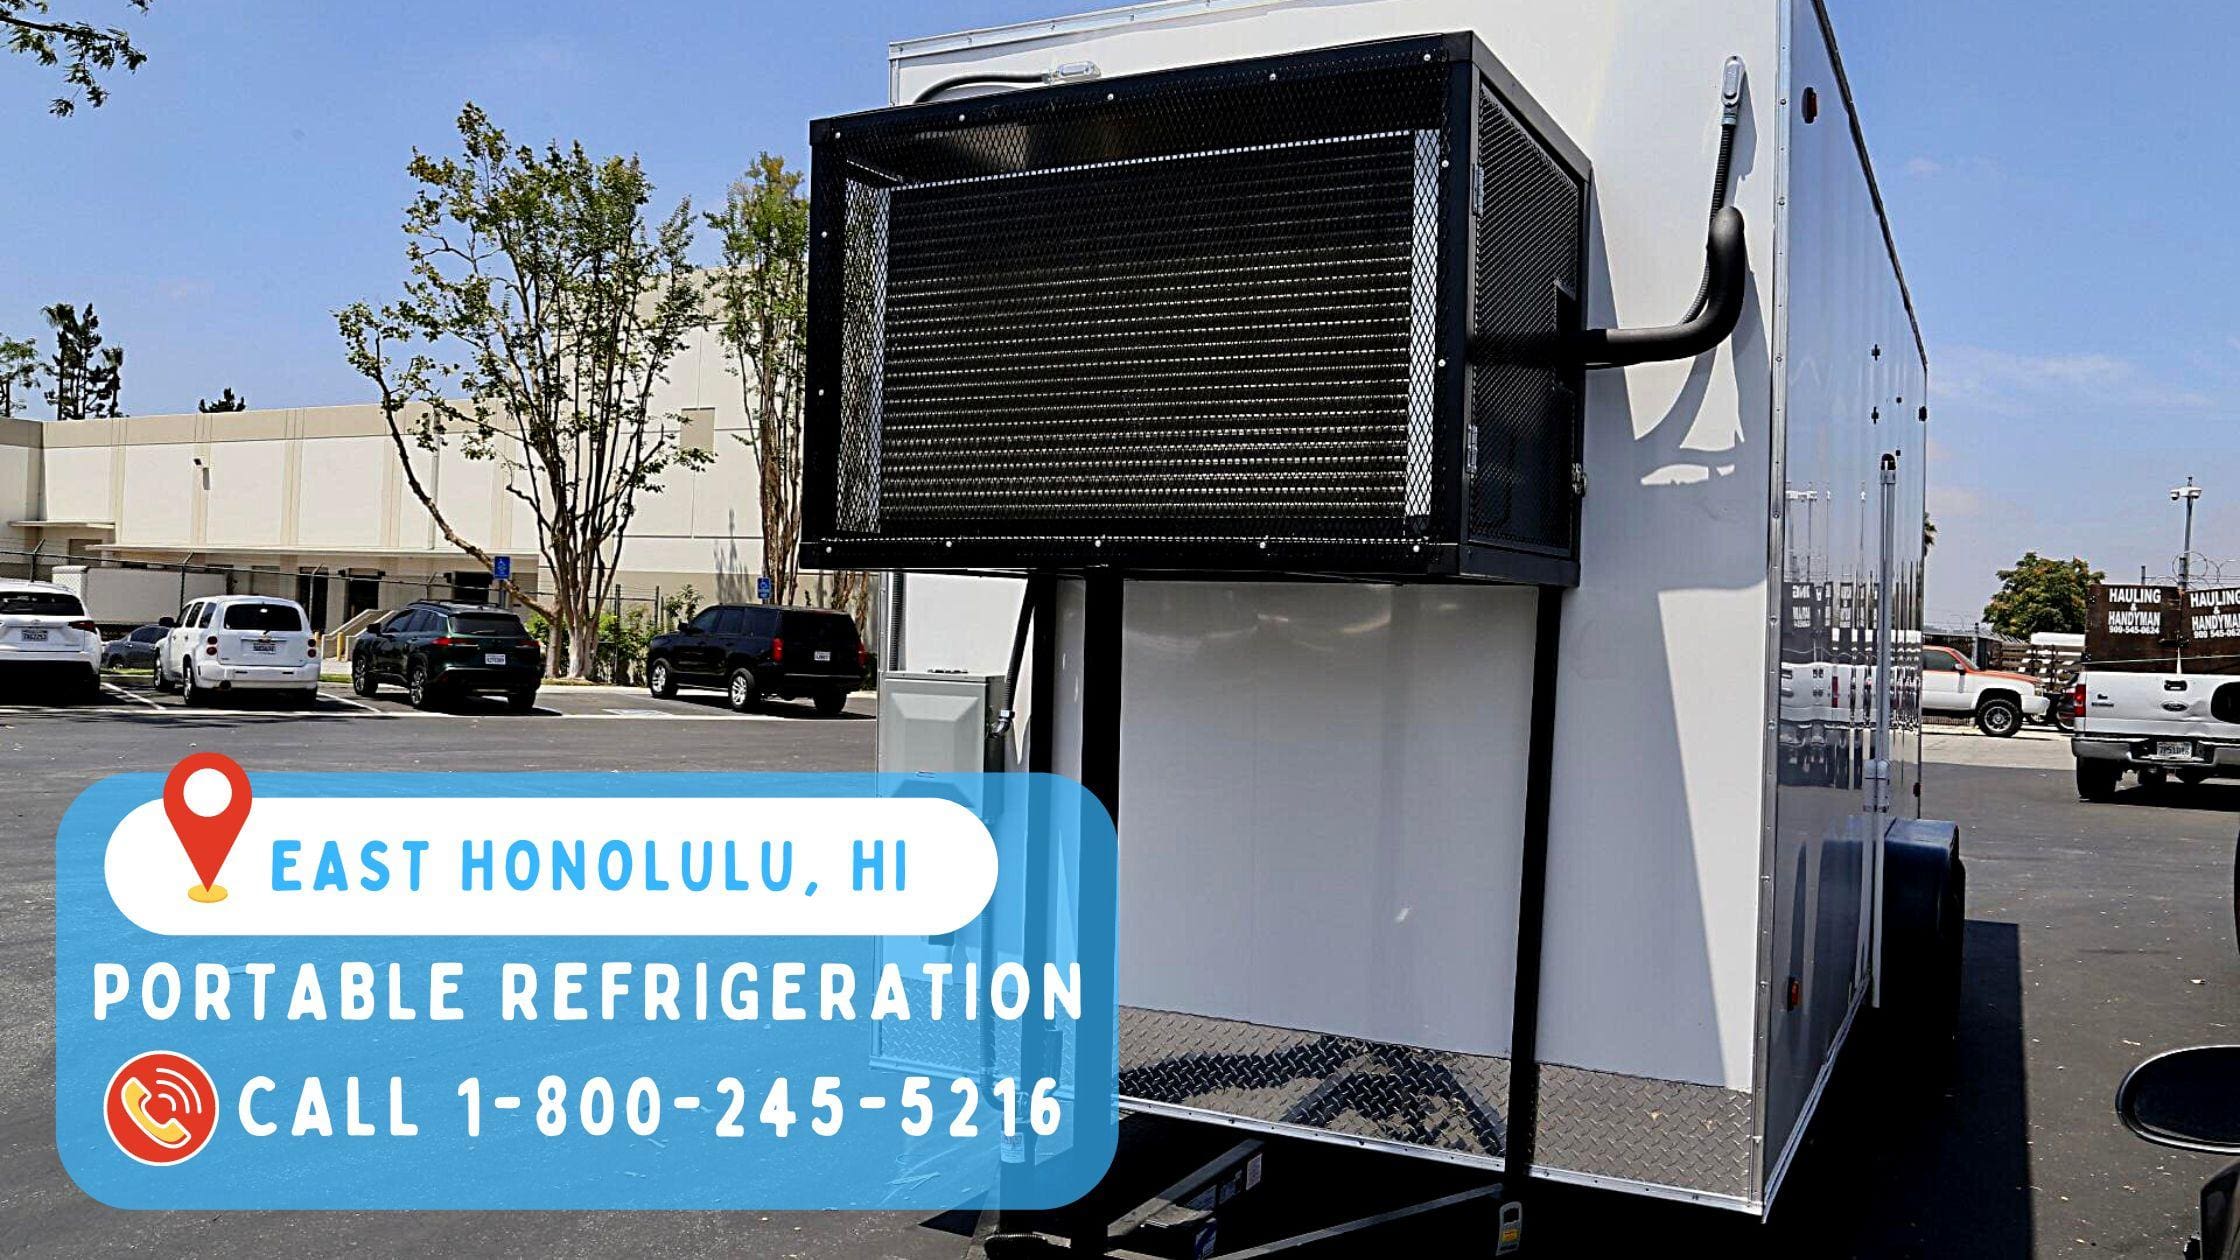 Portable refrigeration located in East Honolulu